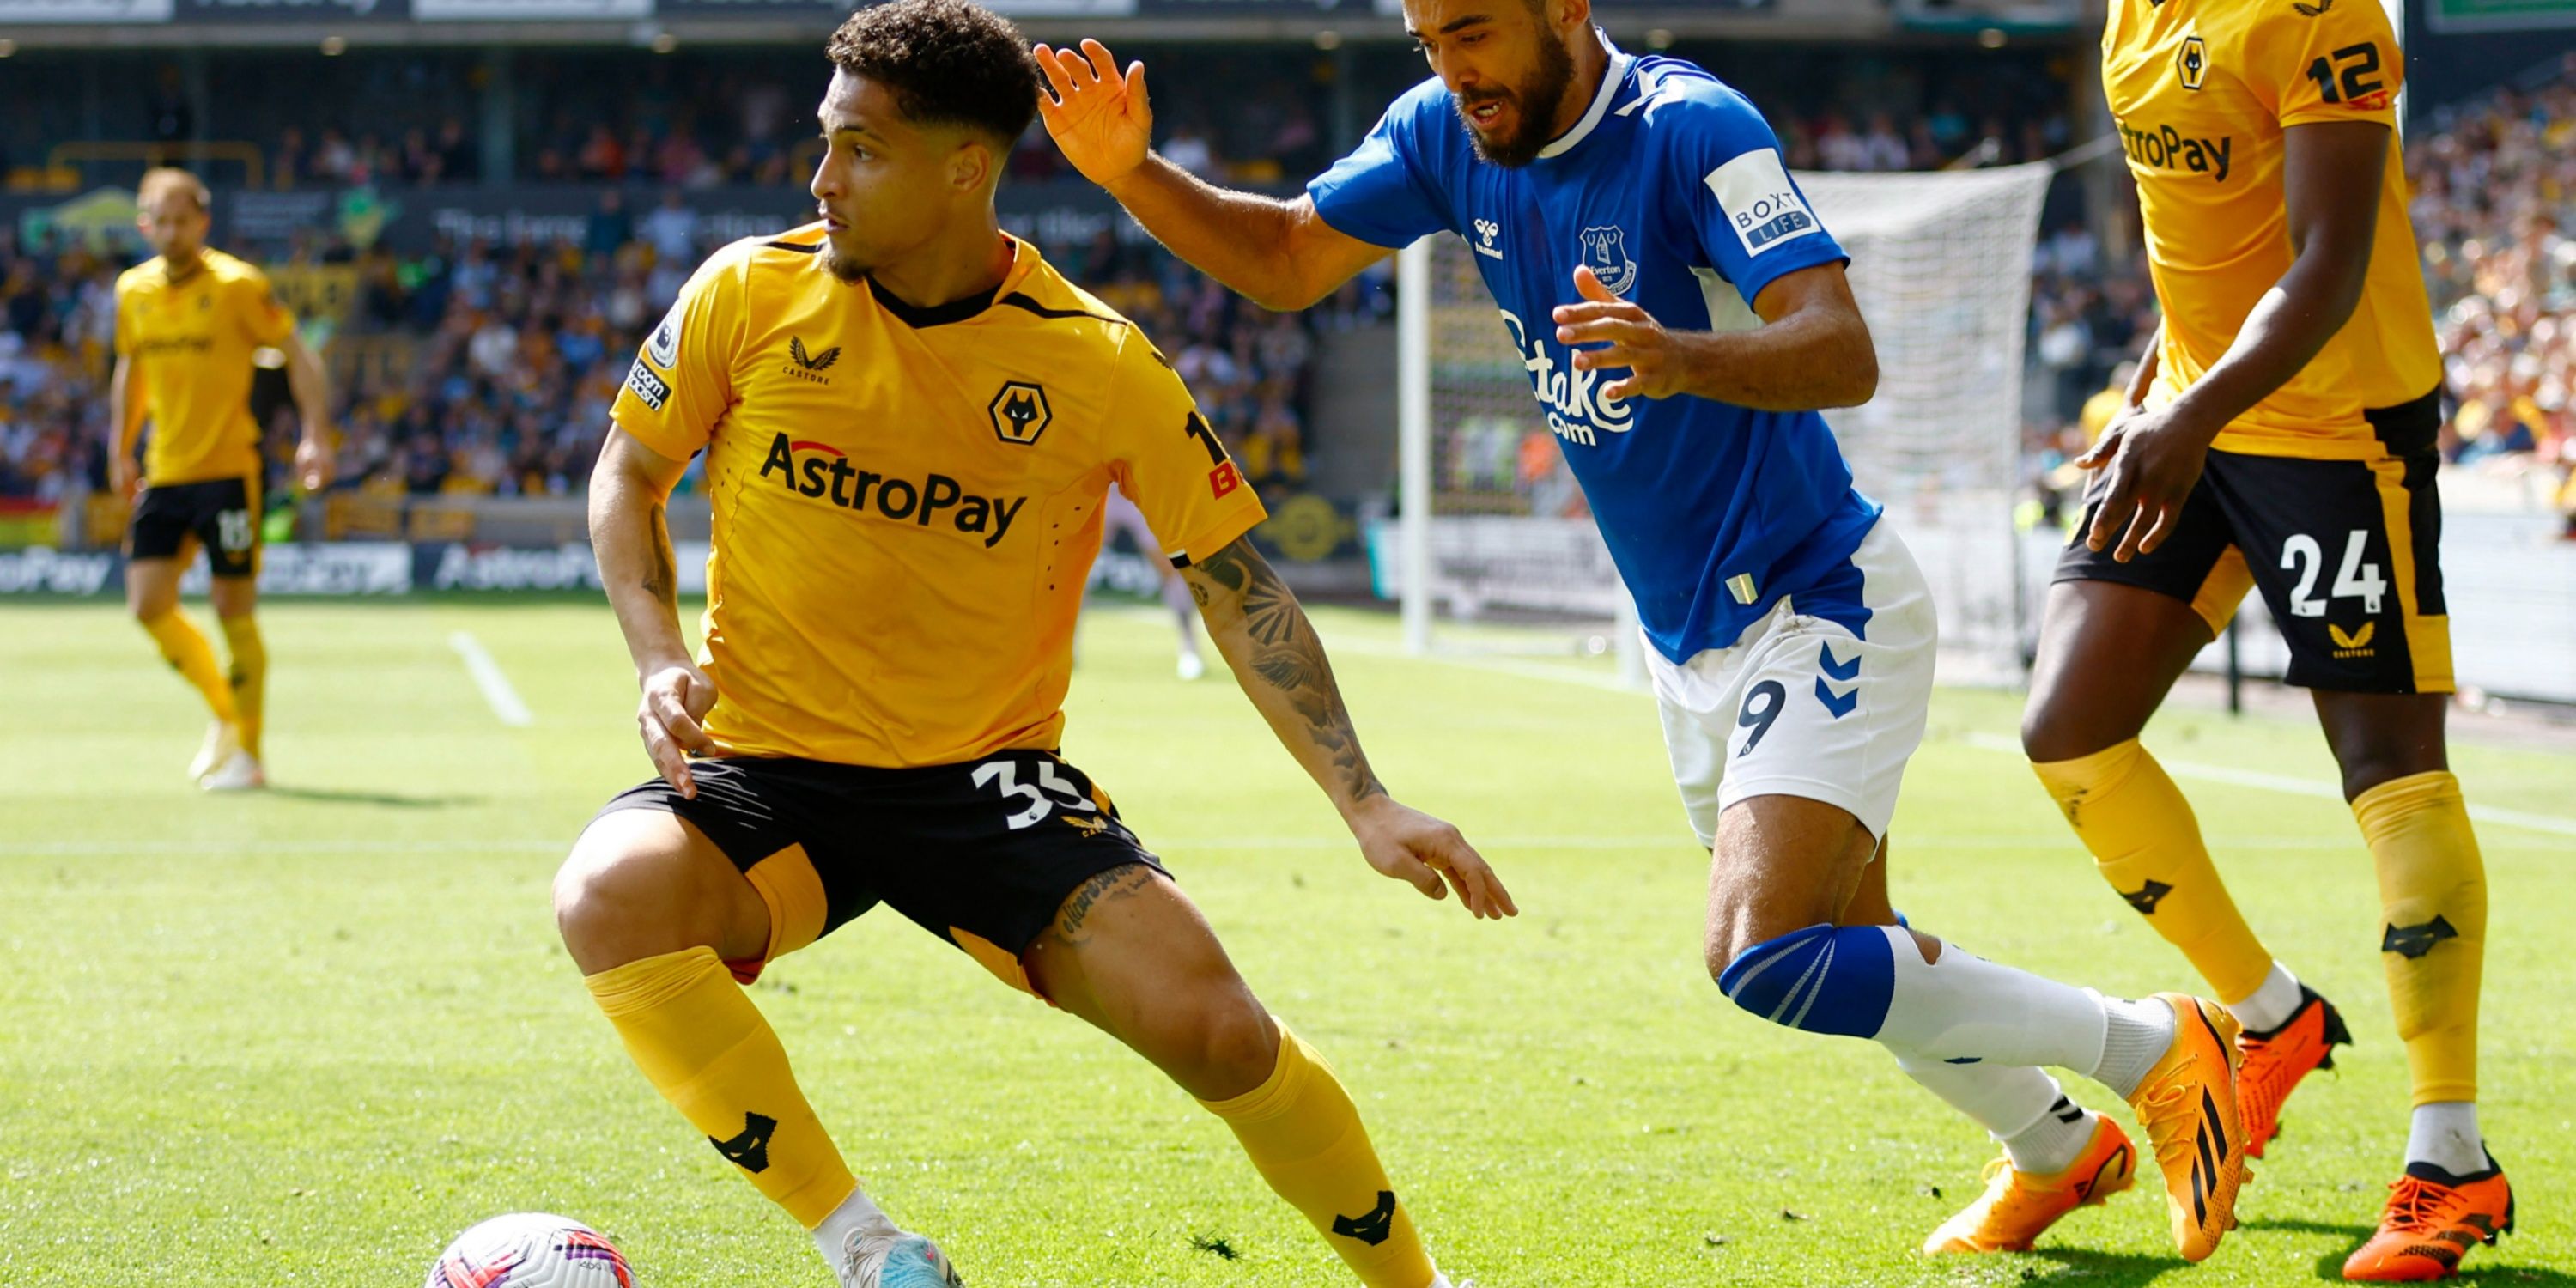 wolves shouldn't have let £51m-rated ace go who's better than gomes